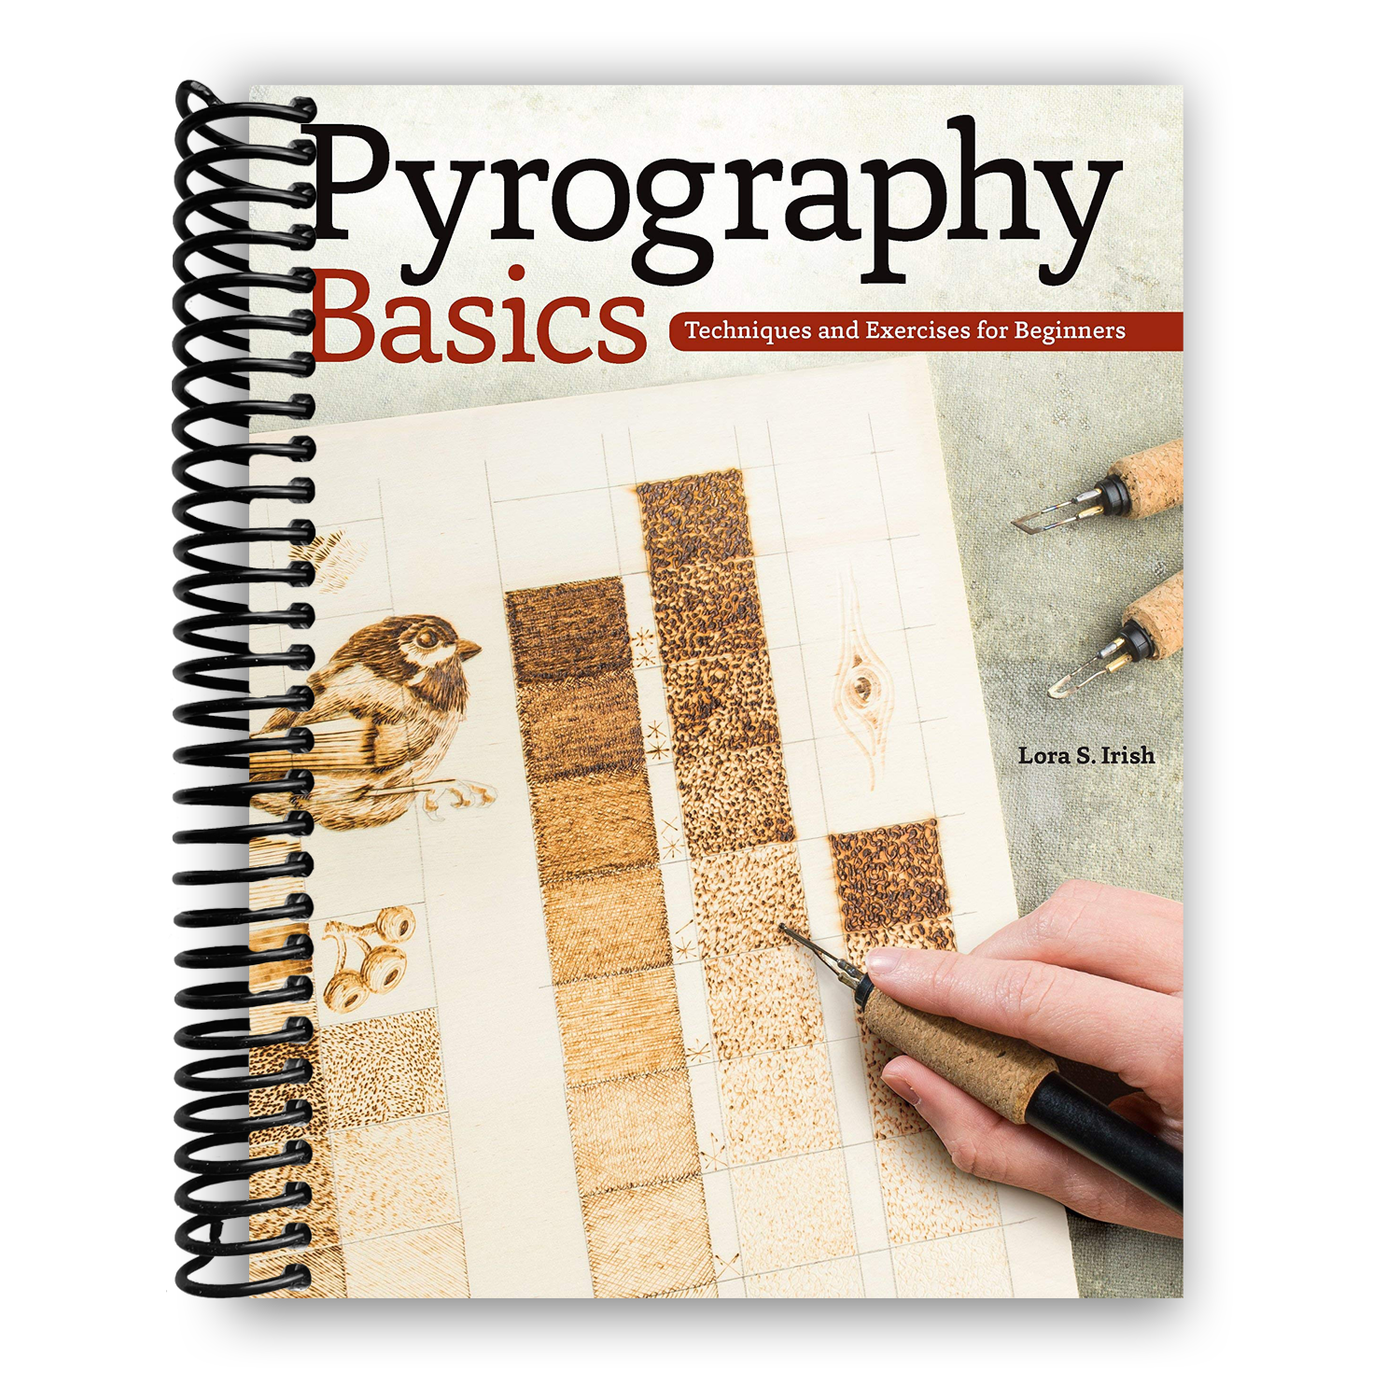 Pyrography Basics: Techniques and Exercises for Beginners (Spiral Bound)